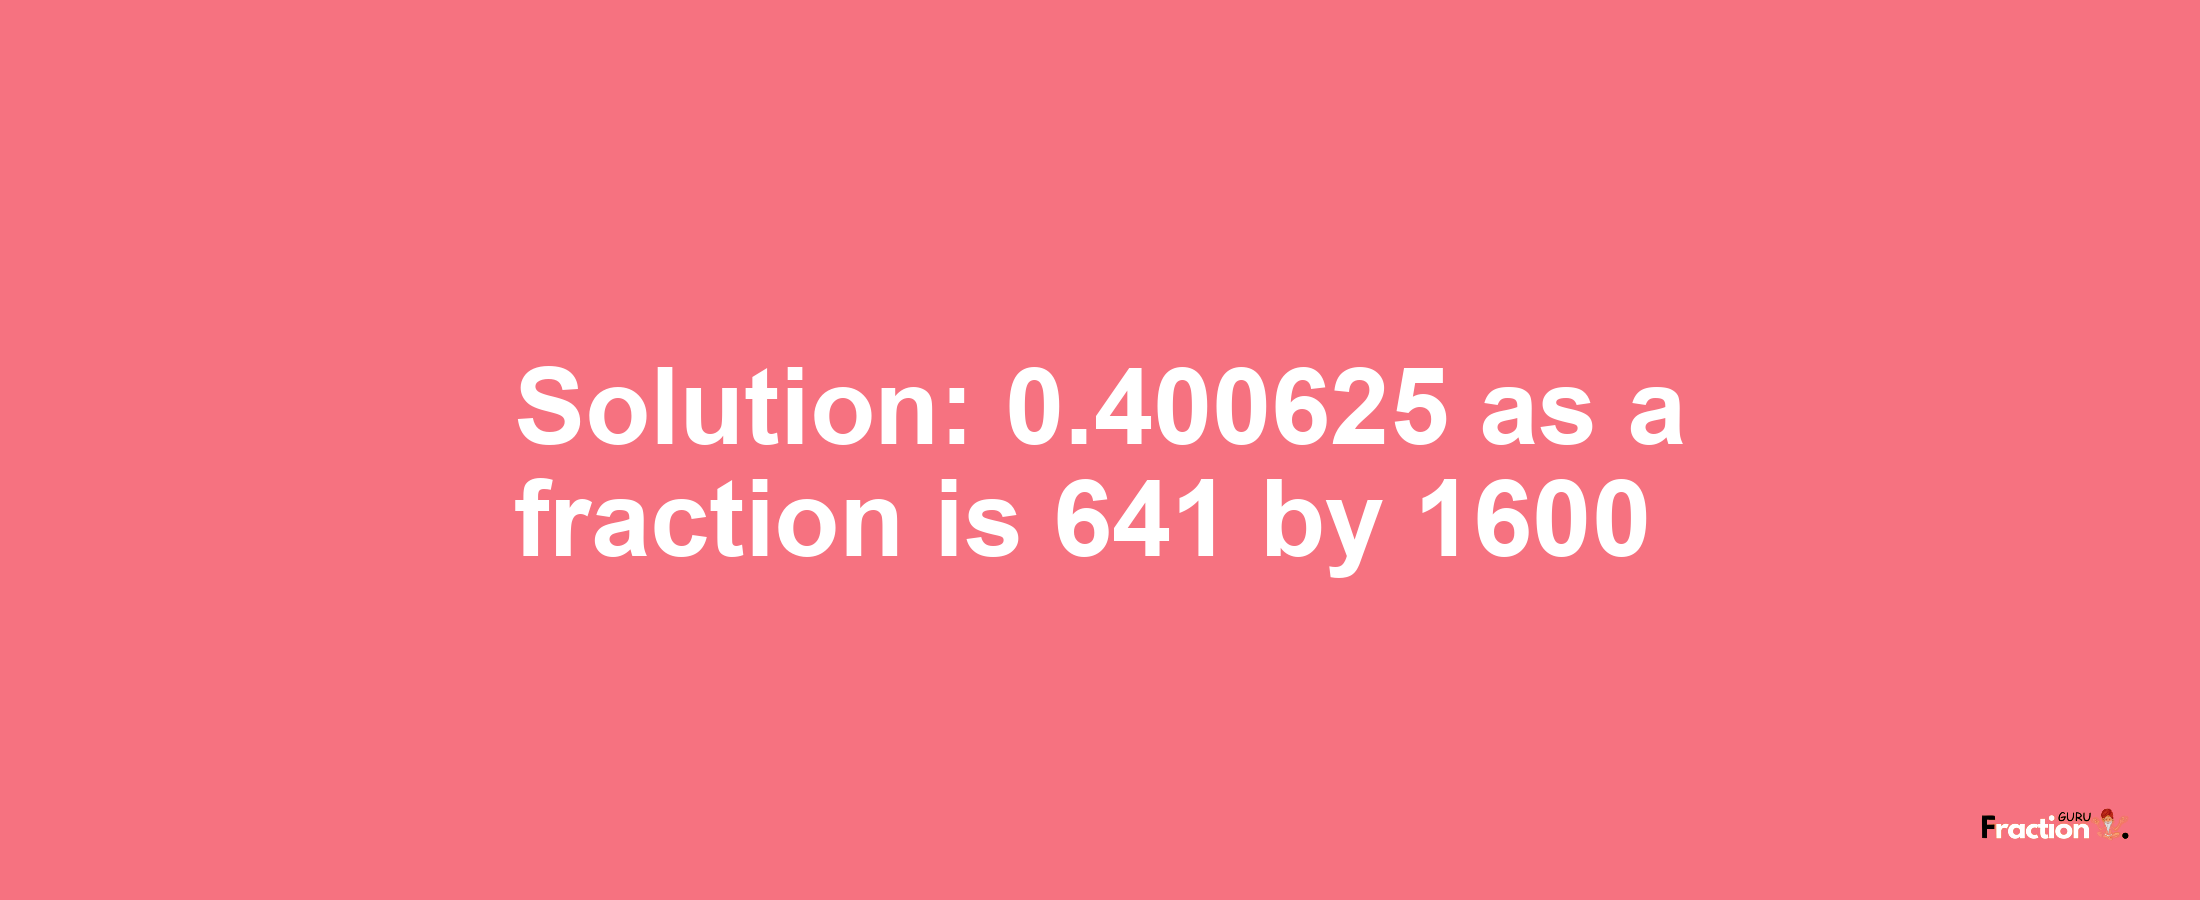 Solution:0.400625 as a fraction is 641/1600